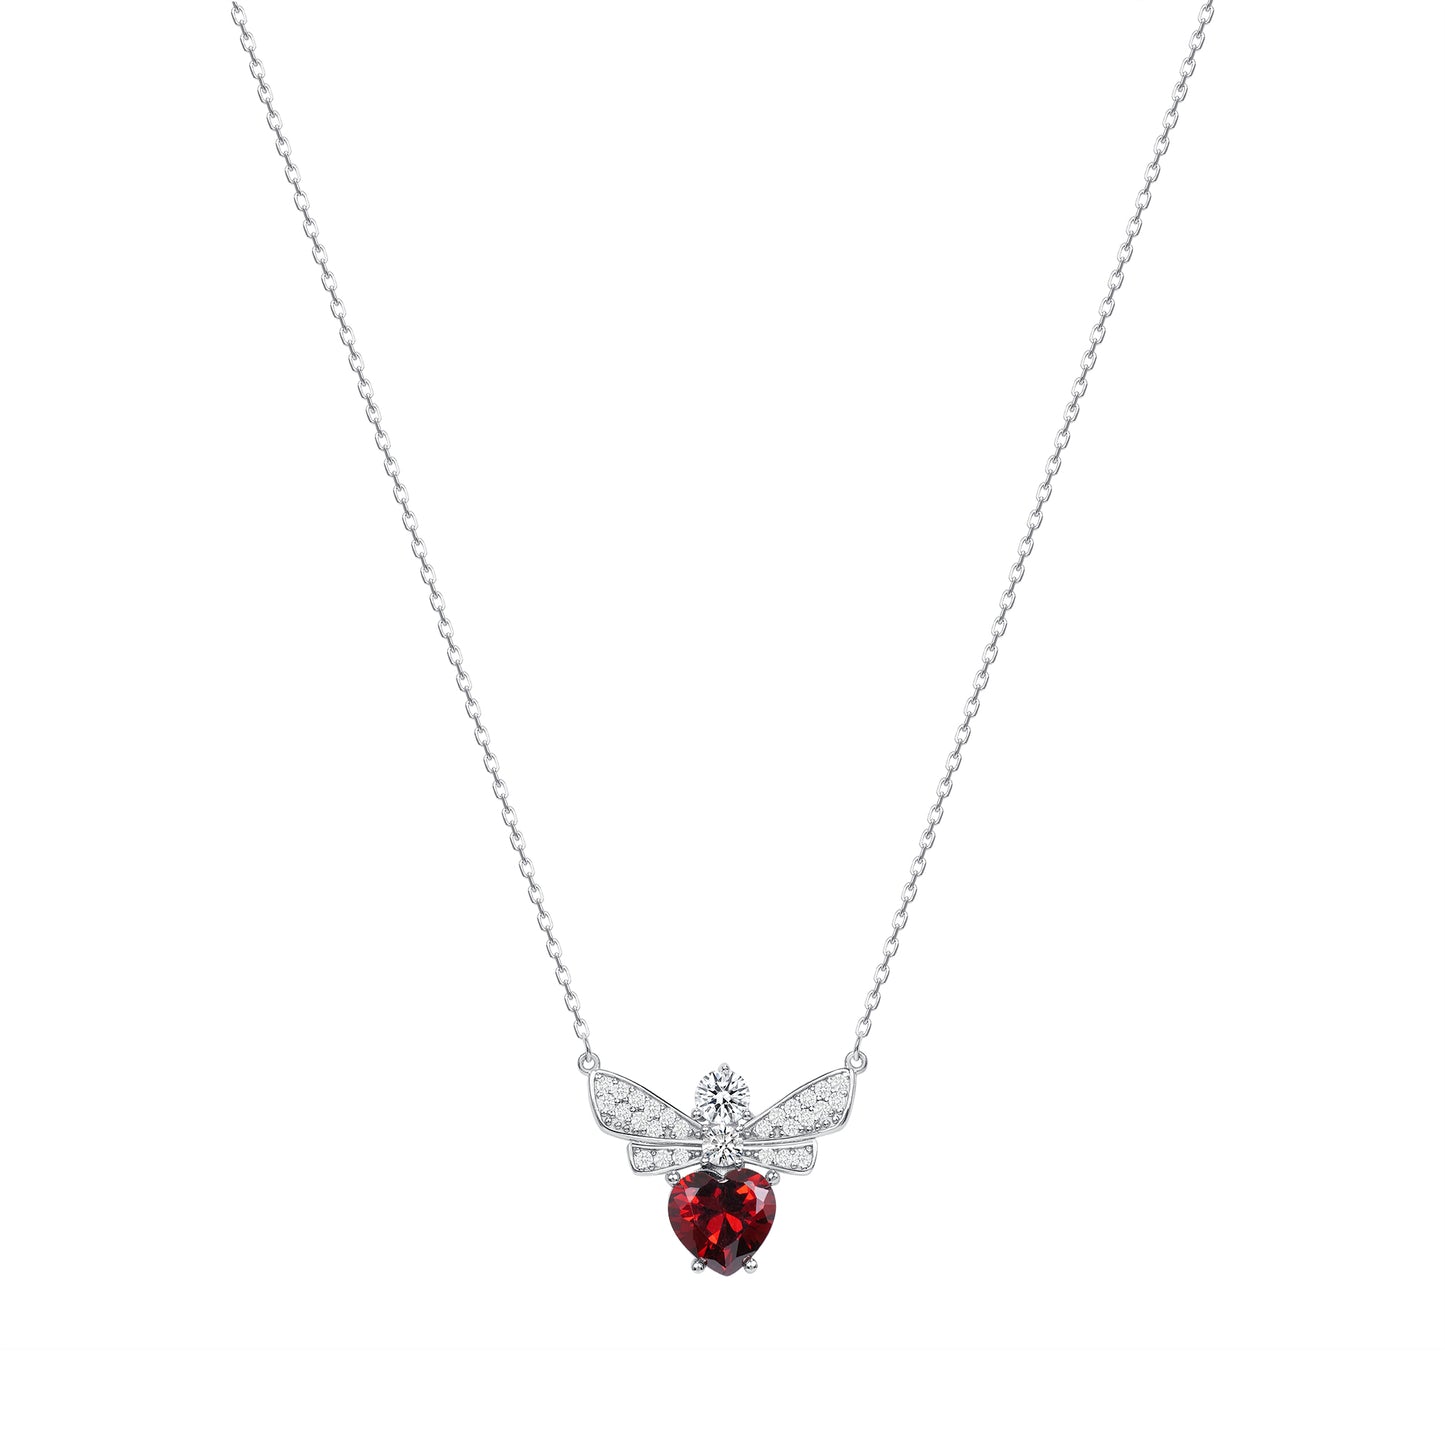 DGN1323. Silver 925  Heart Shape Red Cubic Zirconia Bee Necklace